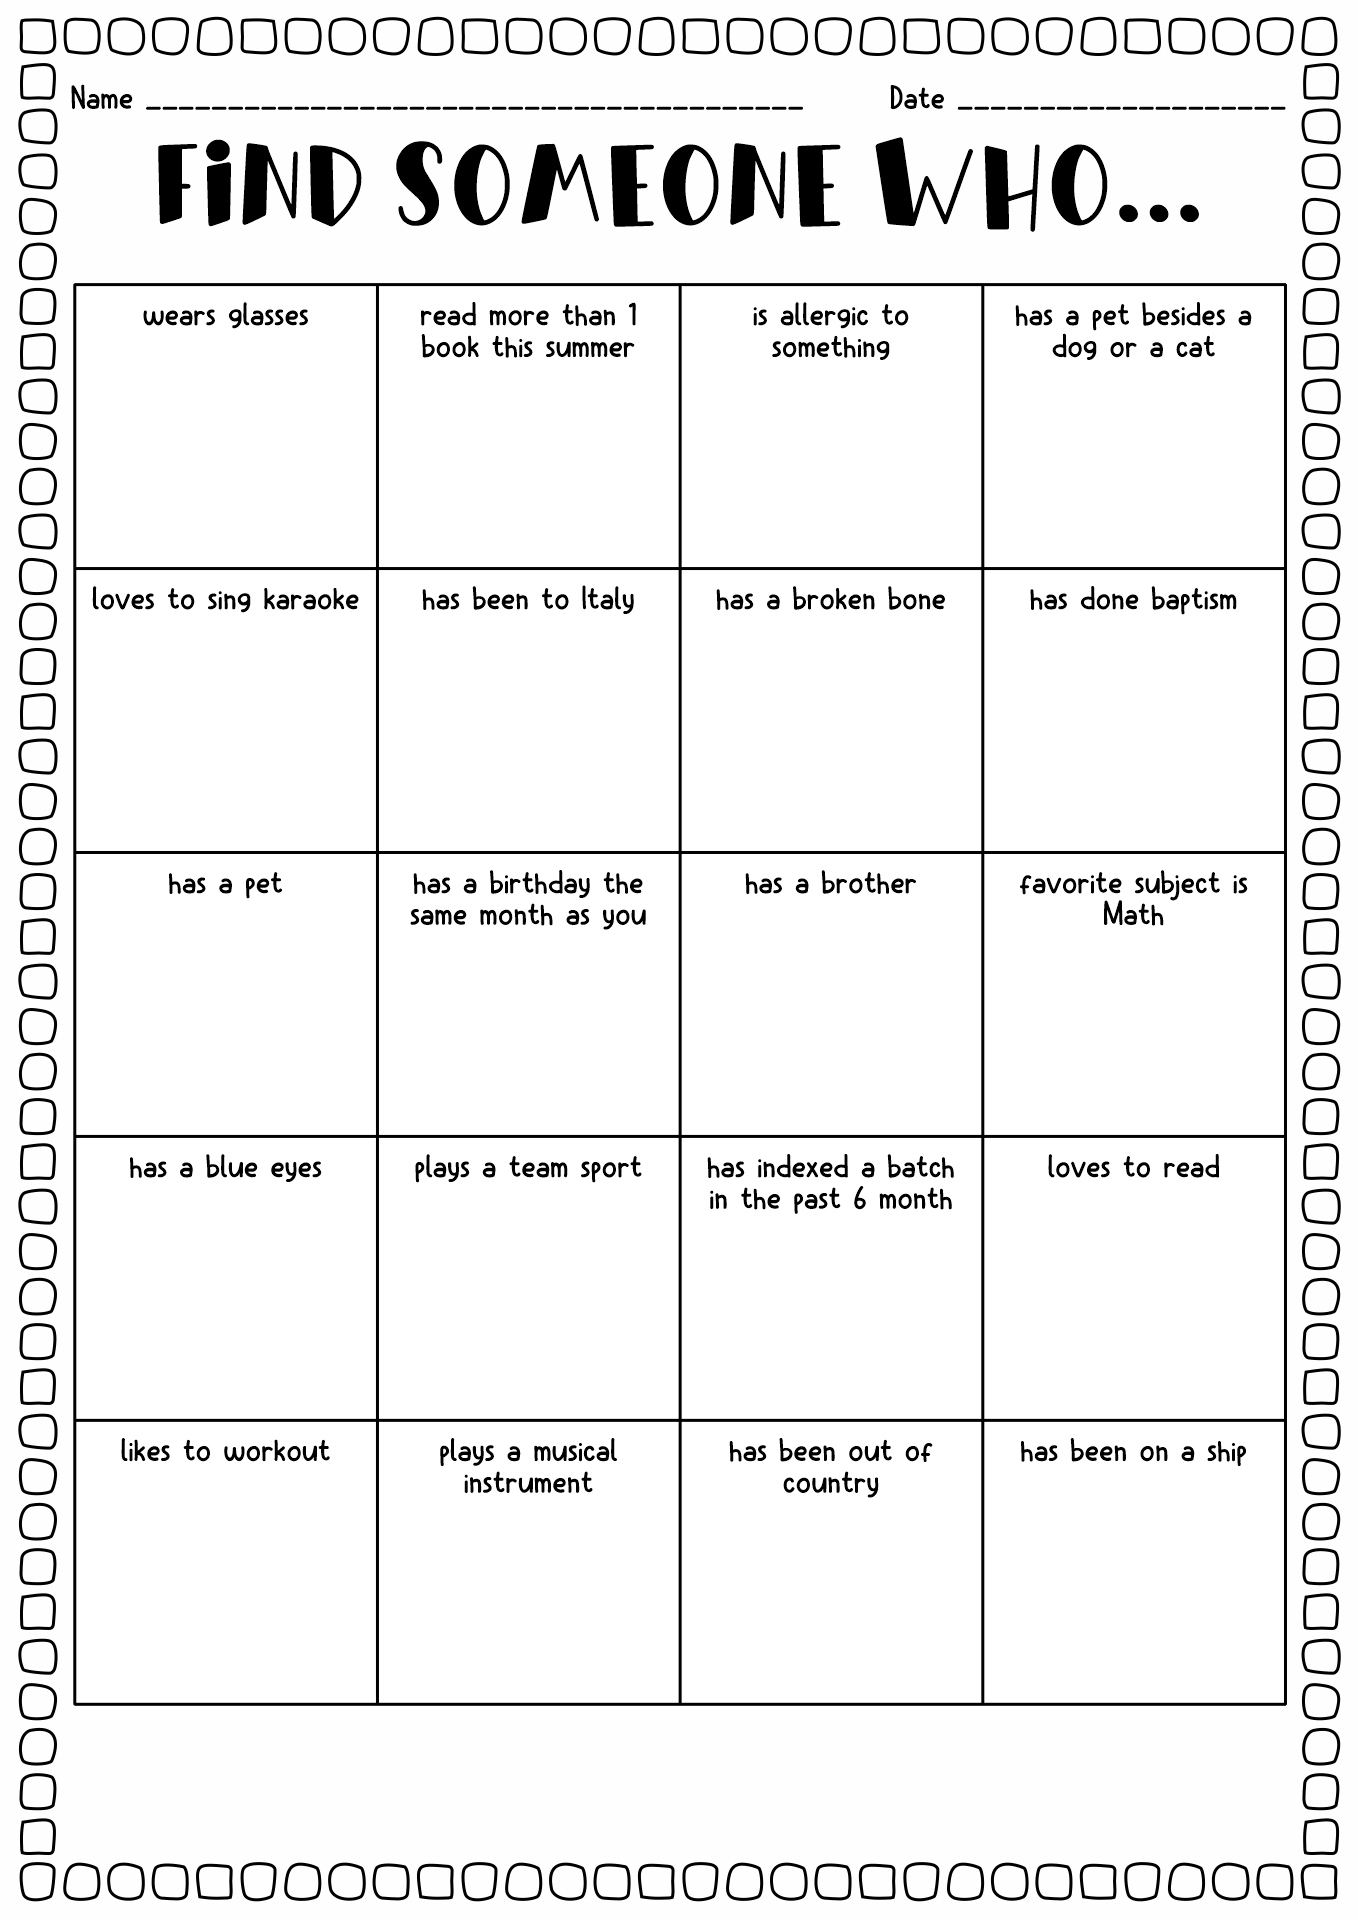 Getting to Know You Scavenger Hunt Worksheet